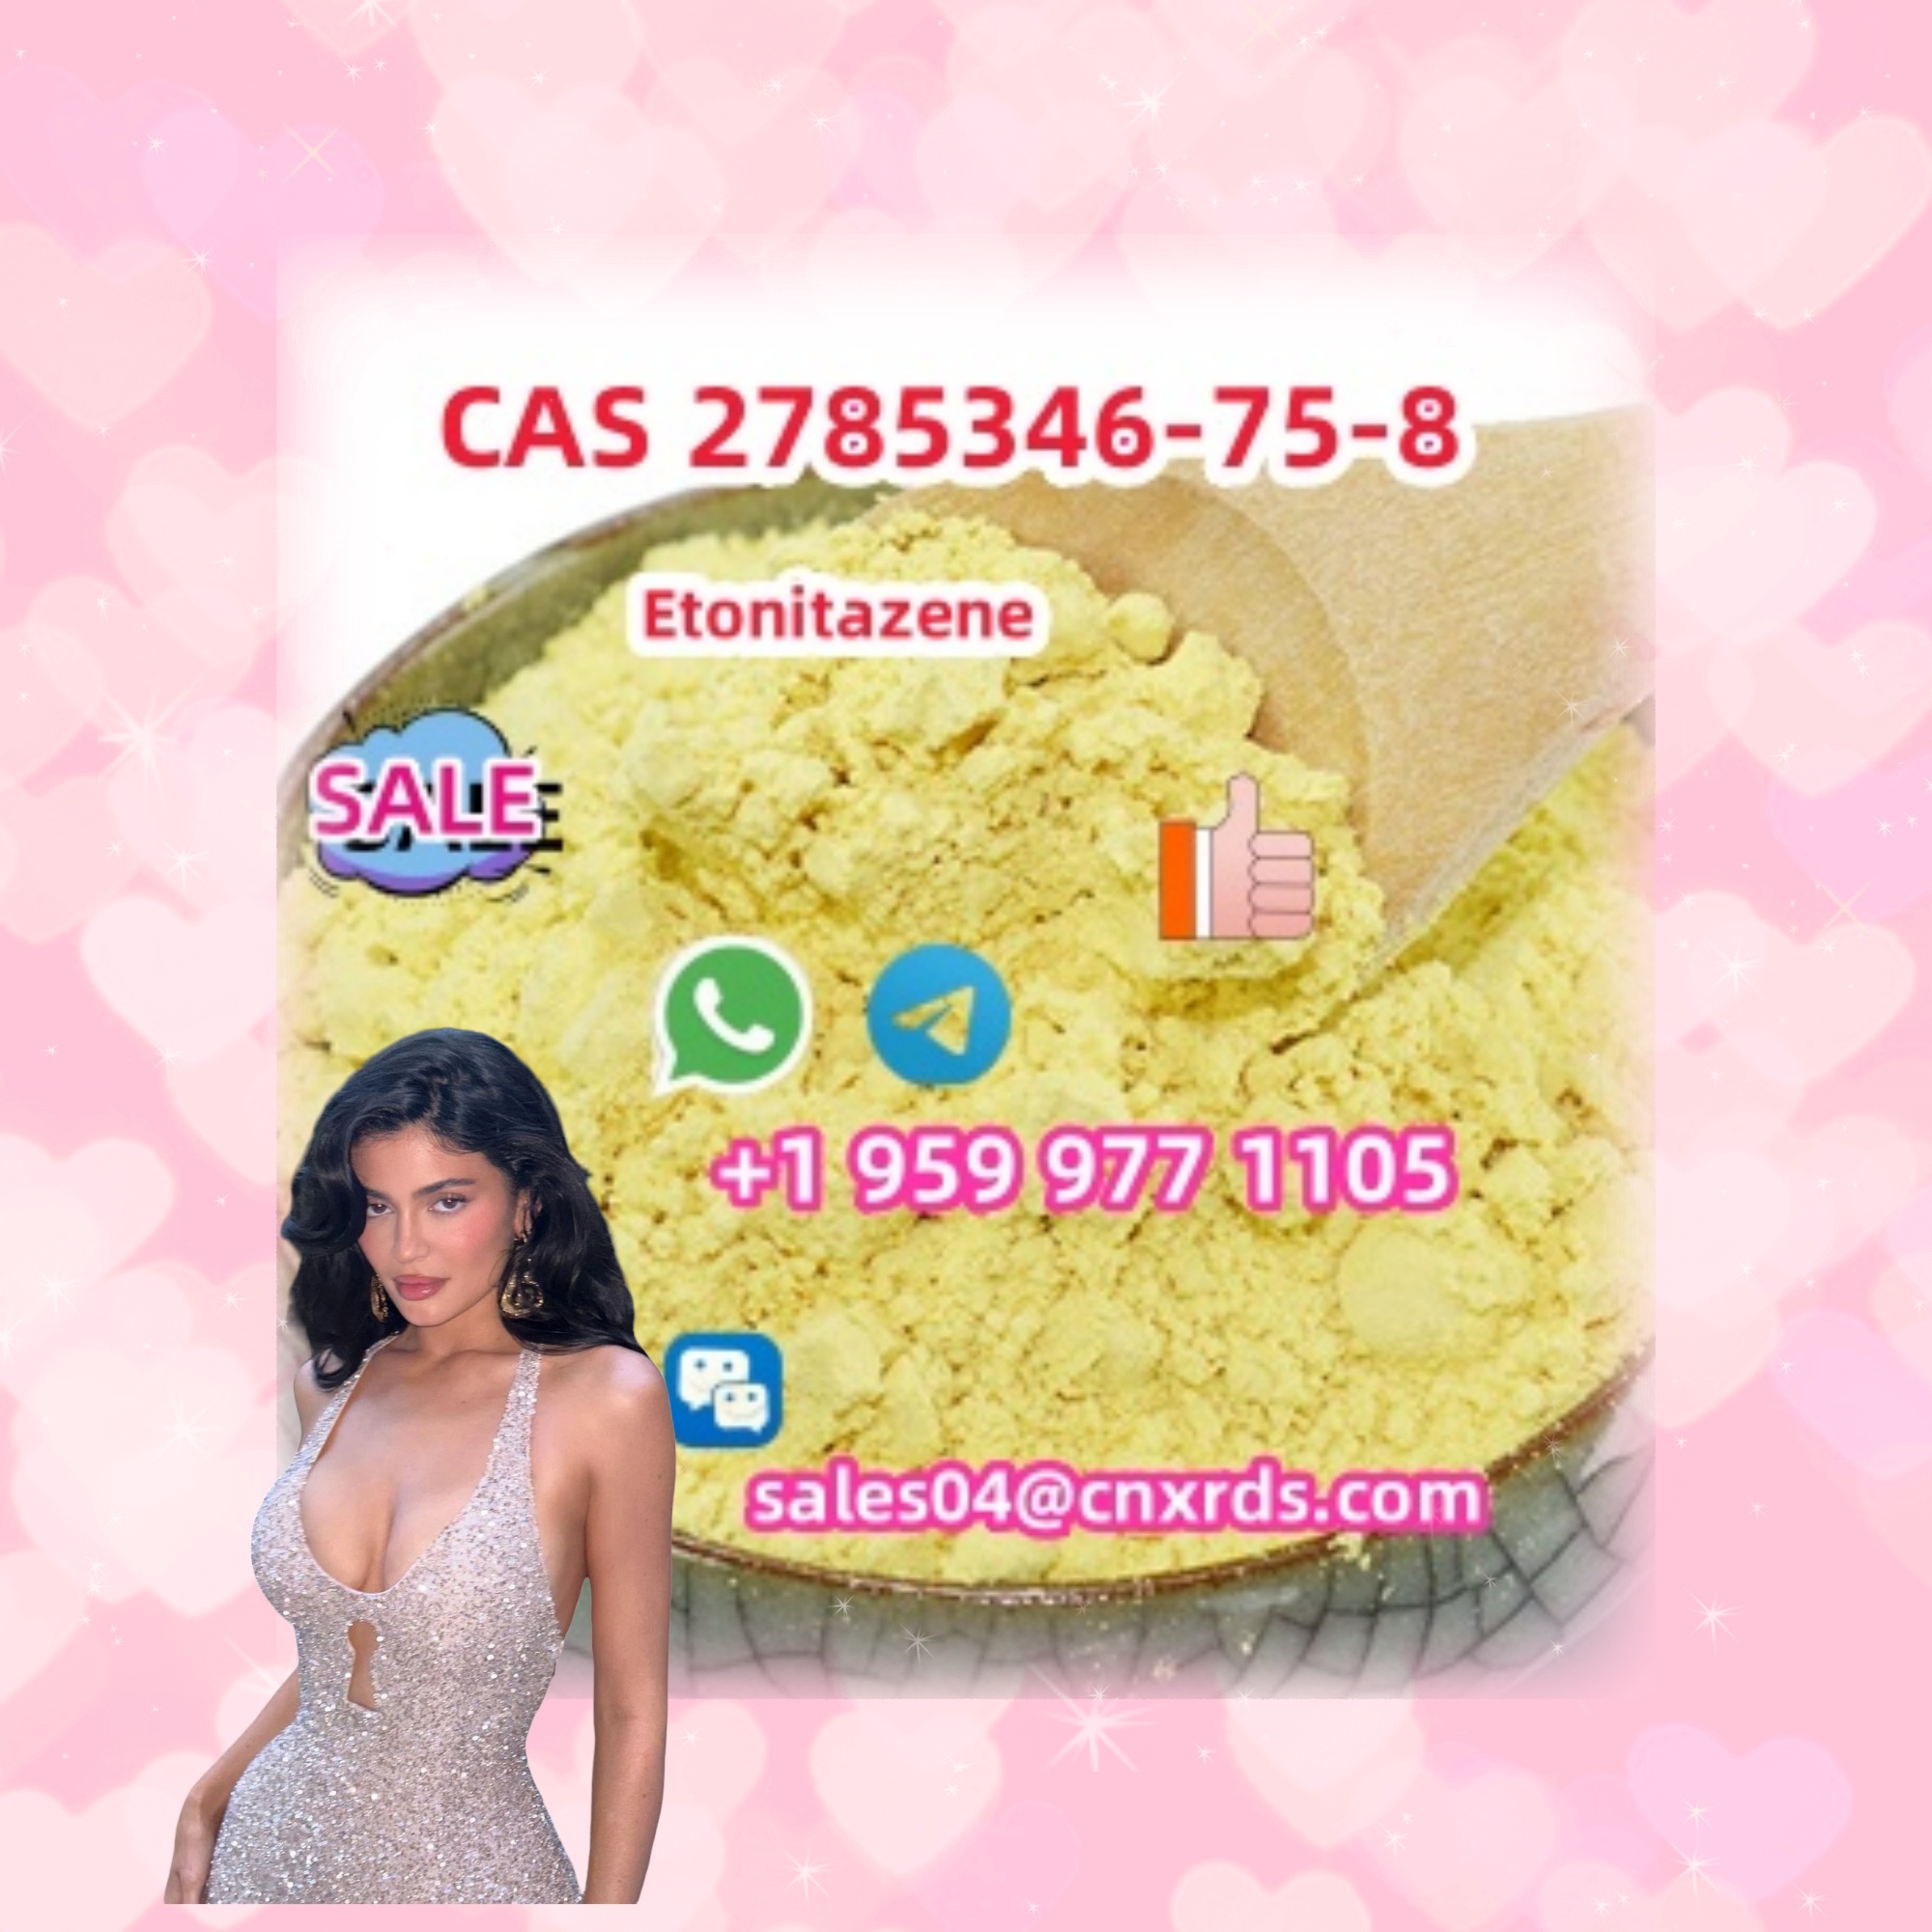 Hot Selling Powder CAS  2785346-75-8 Etonitazene  with 100% Safe and F,aaaaa,Agriculture,Fruits & Berries,77traders